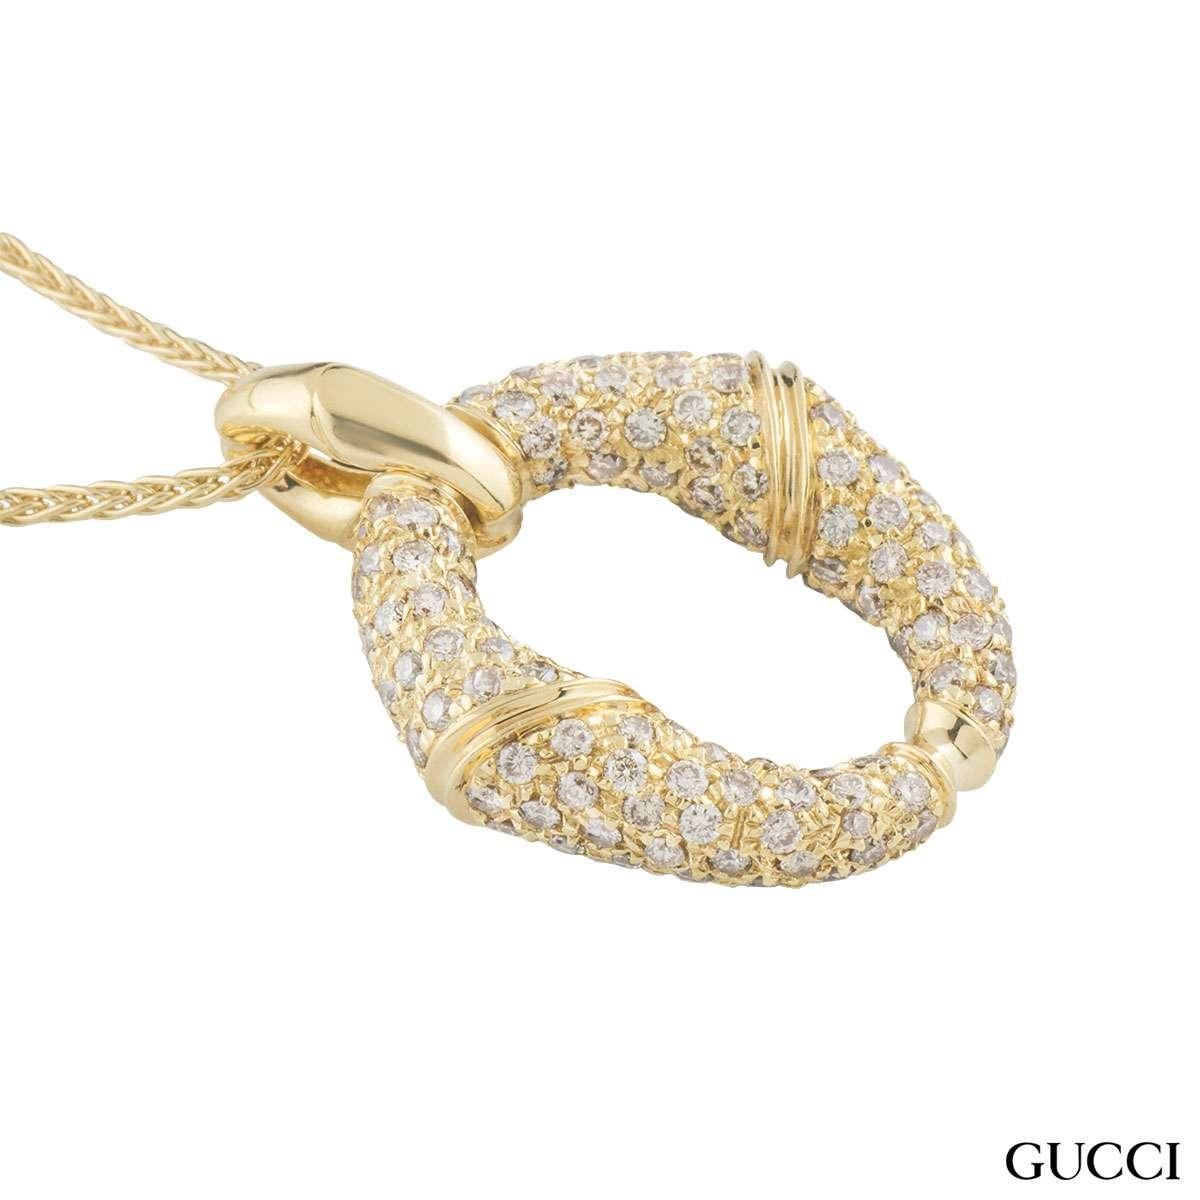 A unique 18k yellow gold diamond Gucci pendant from the Bamboo collection. The pendant features a circular bamboo motif pave set with round brilliant cut diamonds totalling approximately 2.82ct. The motif measures 2.3cm in width and 3.1cm in height